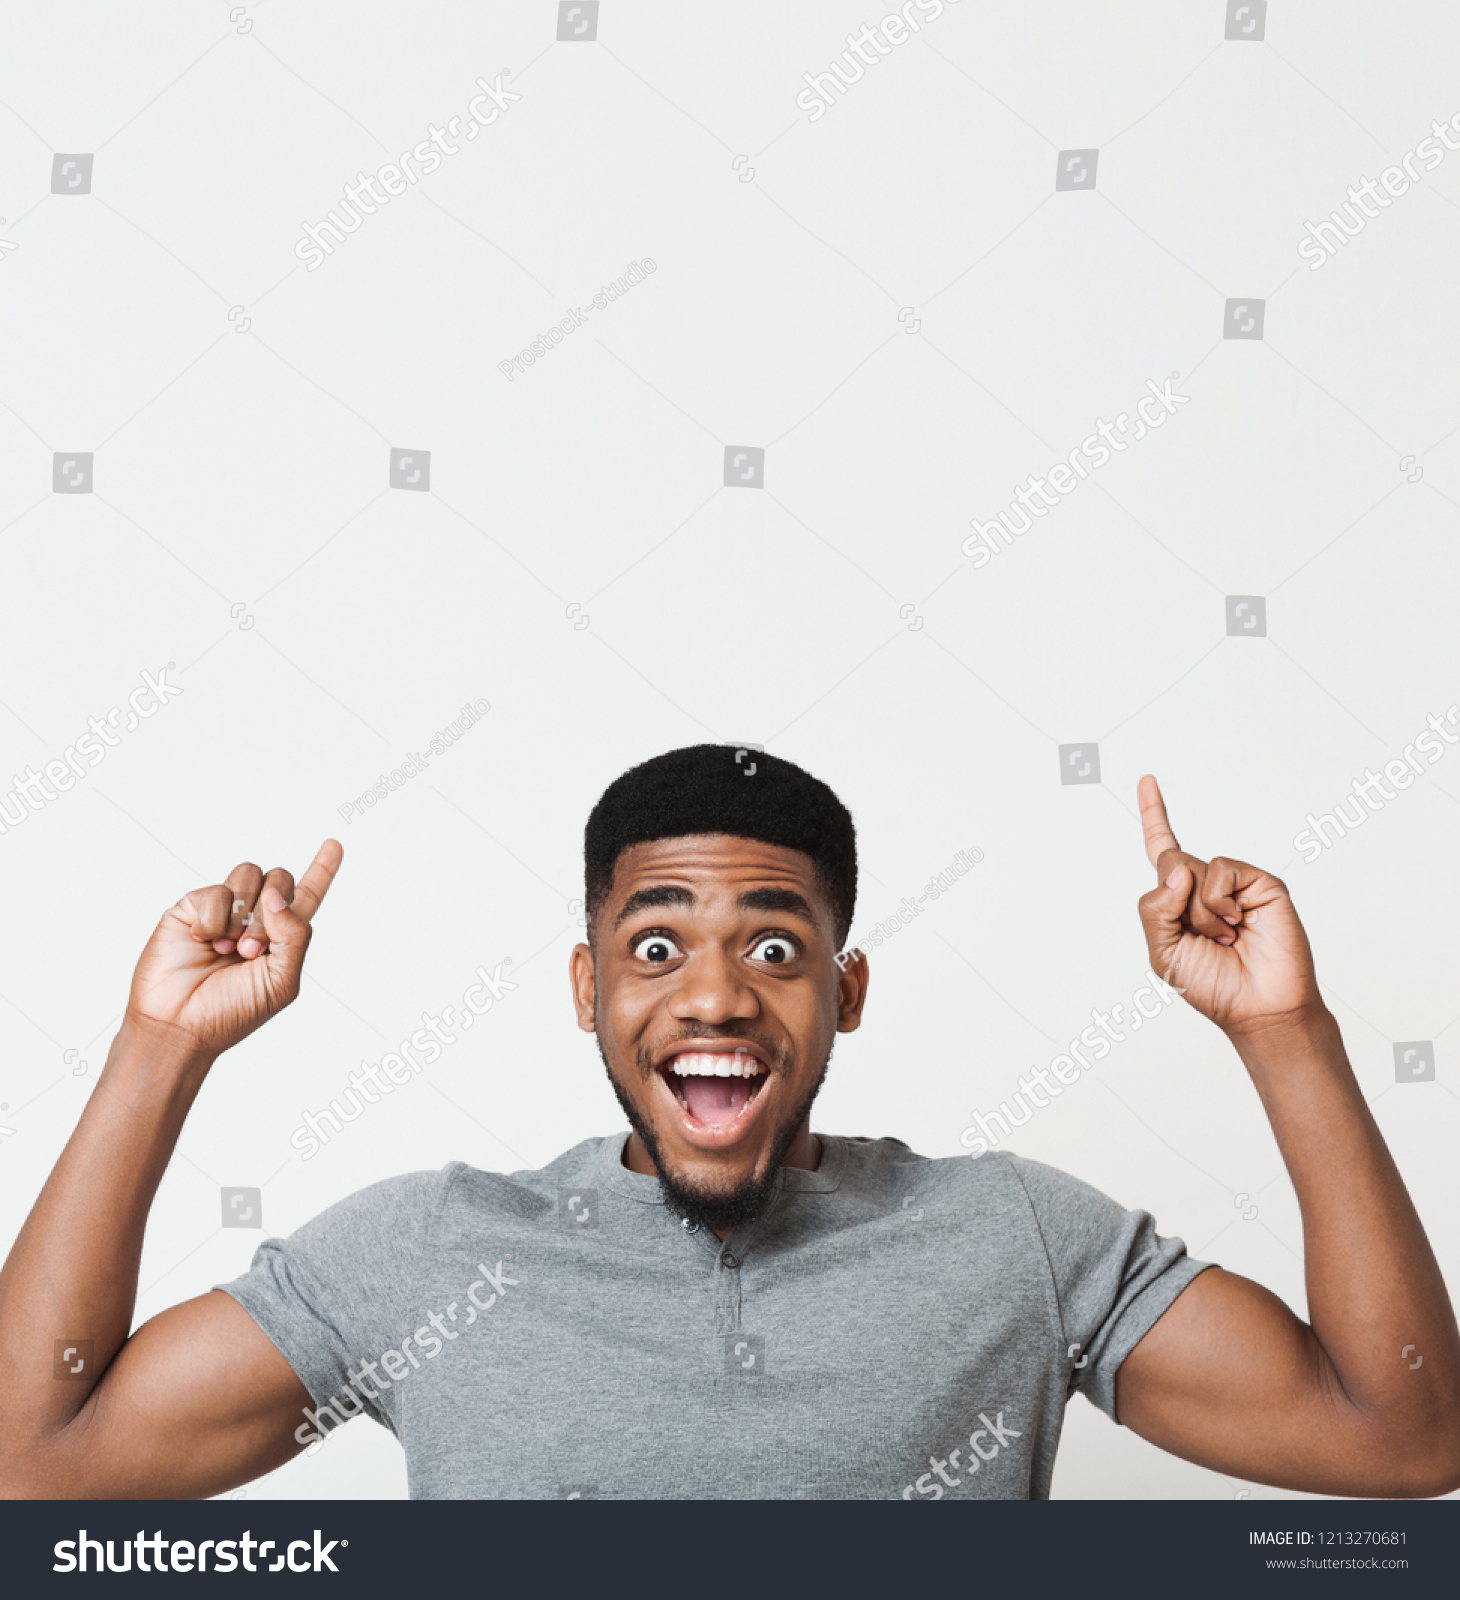 Excited african-american man having an idea and pointing two fingers up at copy space, white studio background #1213270681